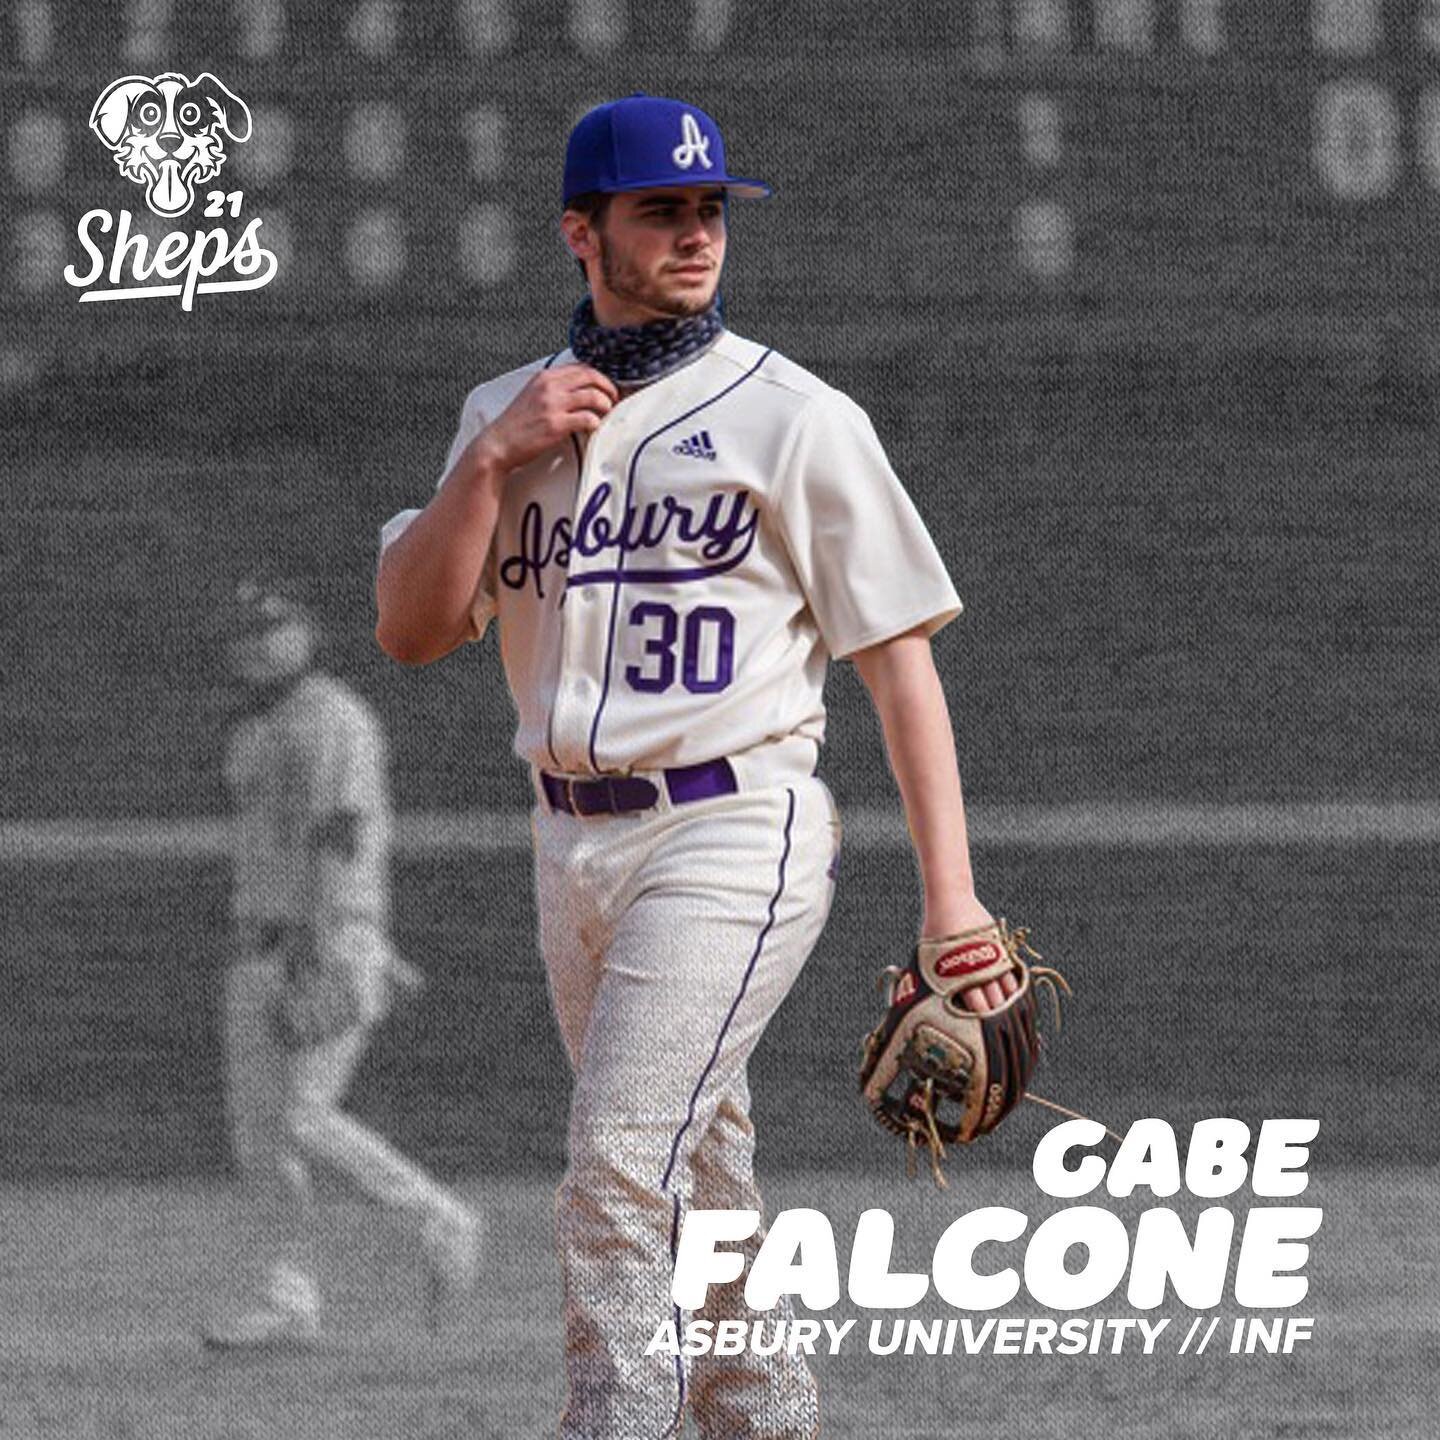 Another great addition to this year&rsquo;s team in @gabe_falcone! #KentuckyBoys #goSheps